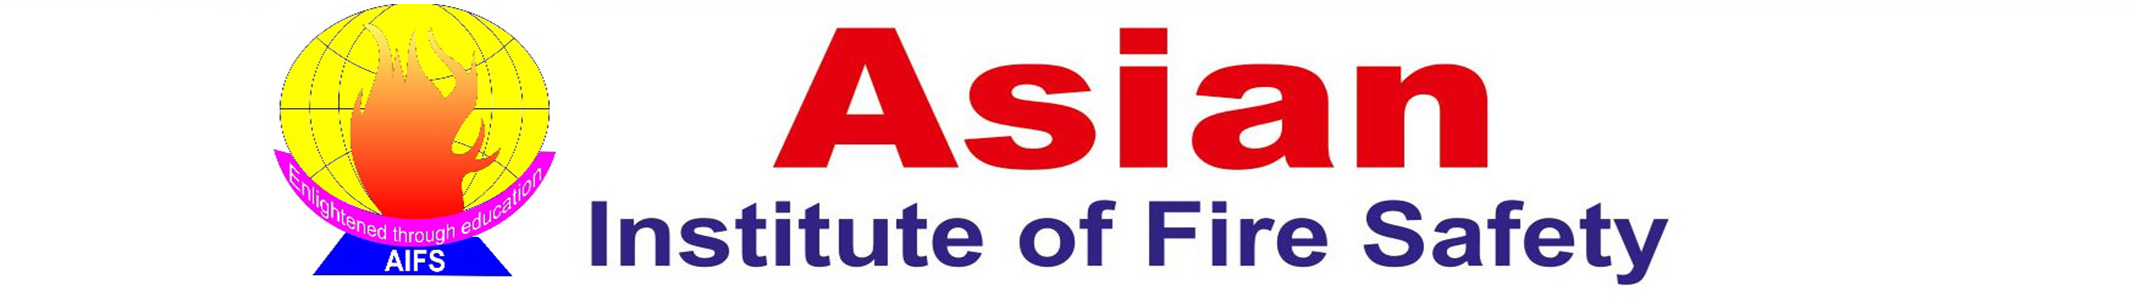 AIFS - Asian Institute of Fire Safety Logo